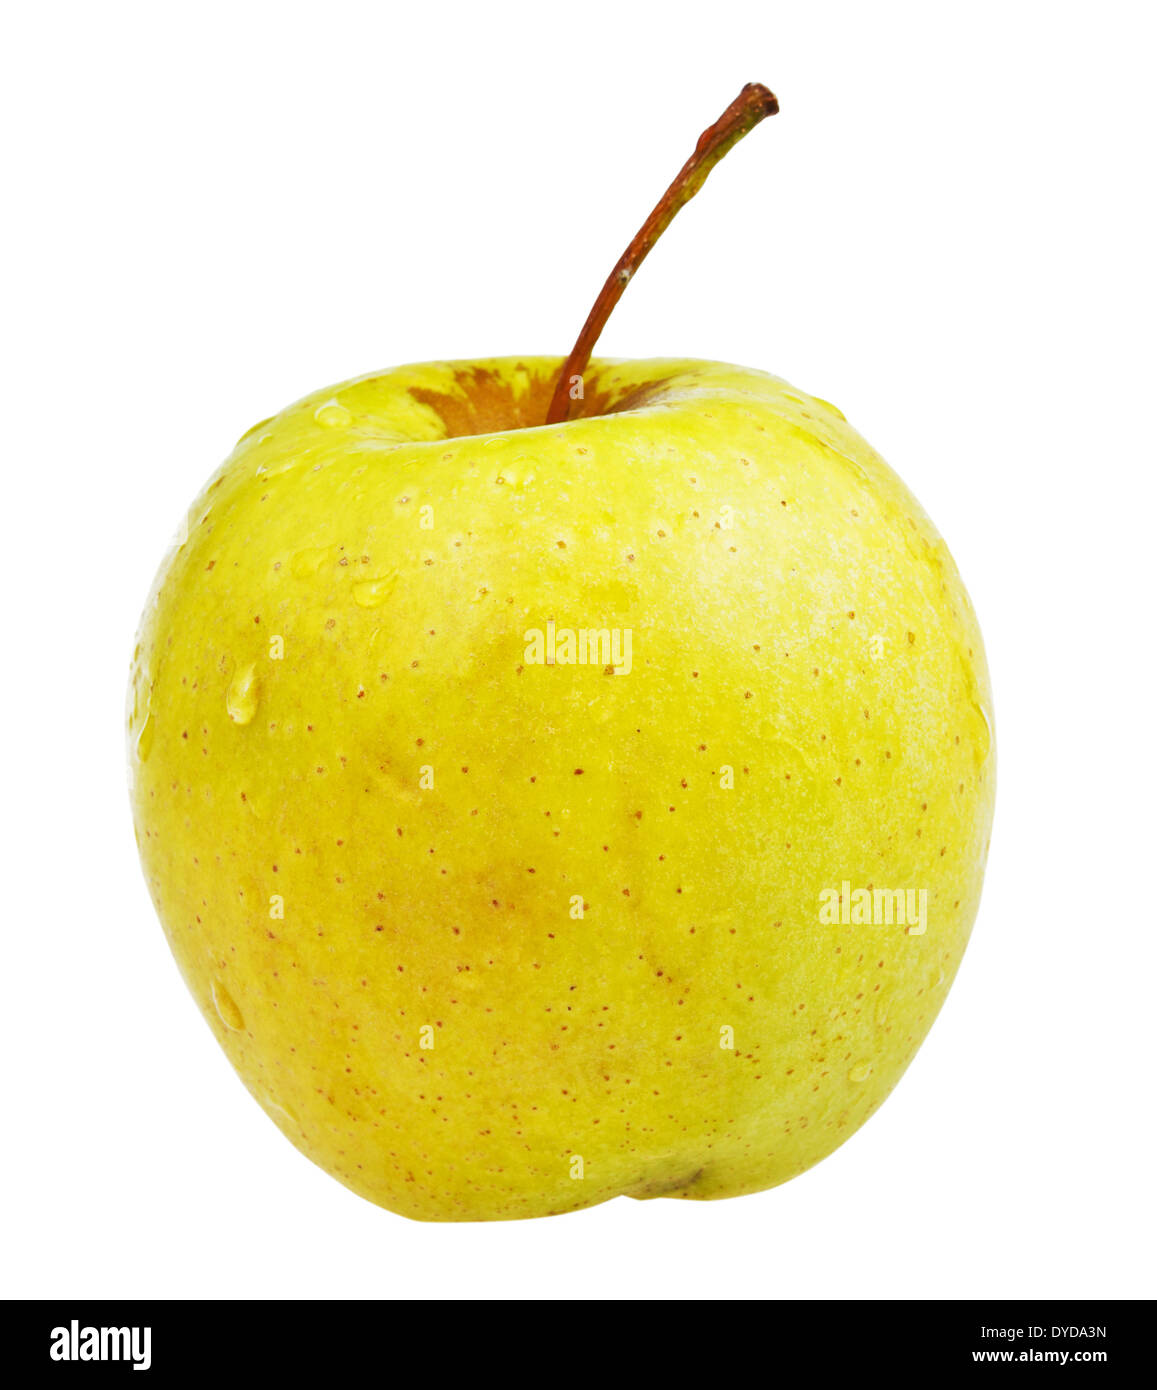 yellow golden delicious apple isolated on white background Stock Photo